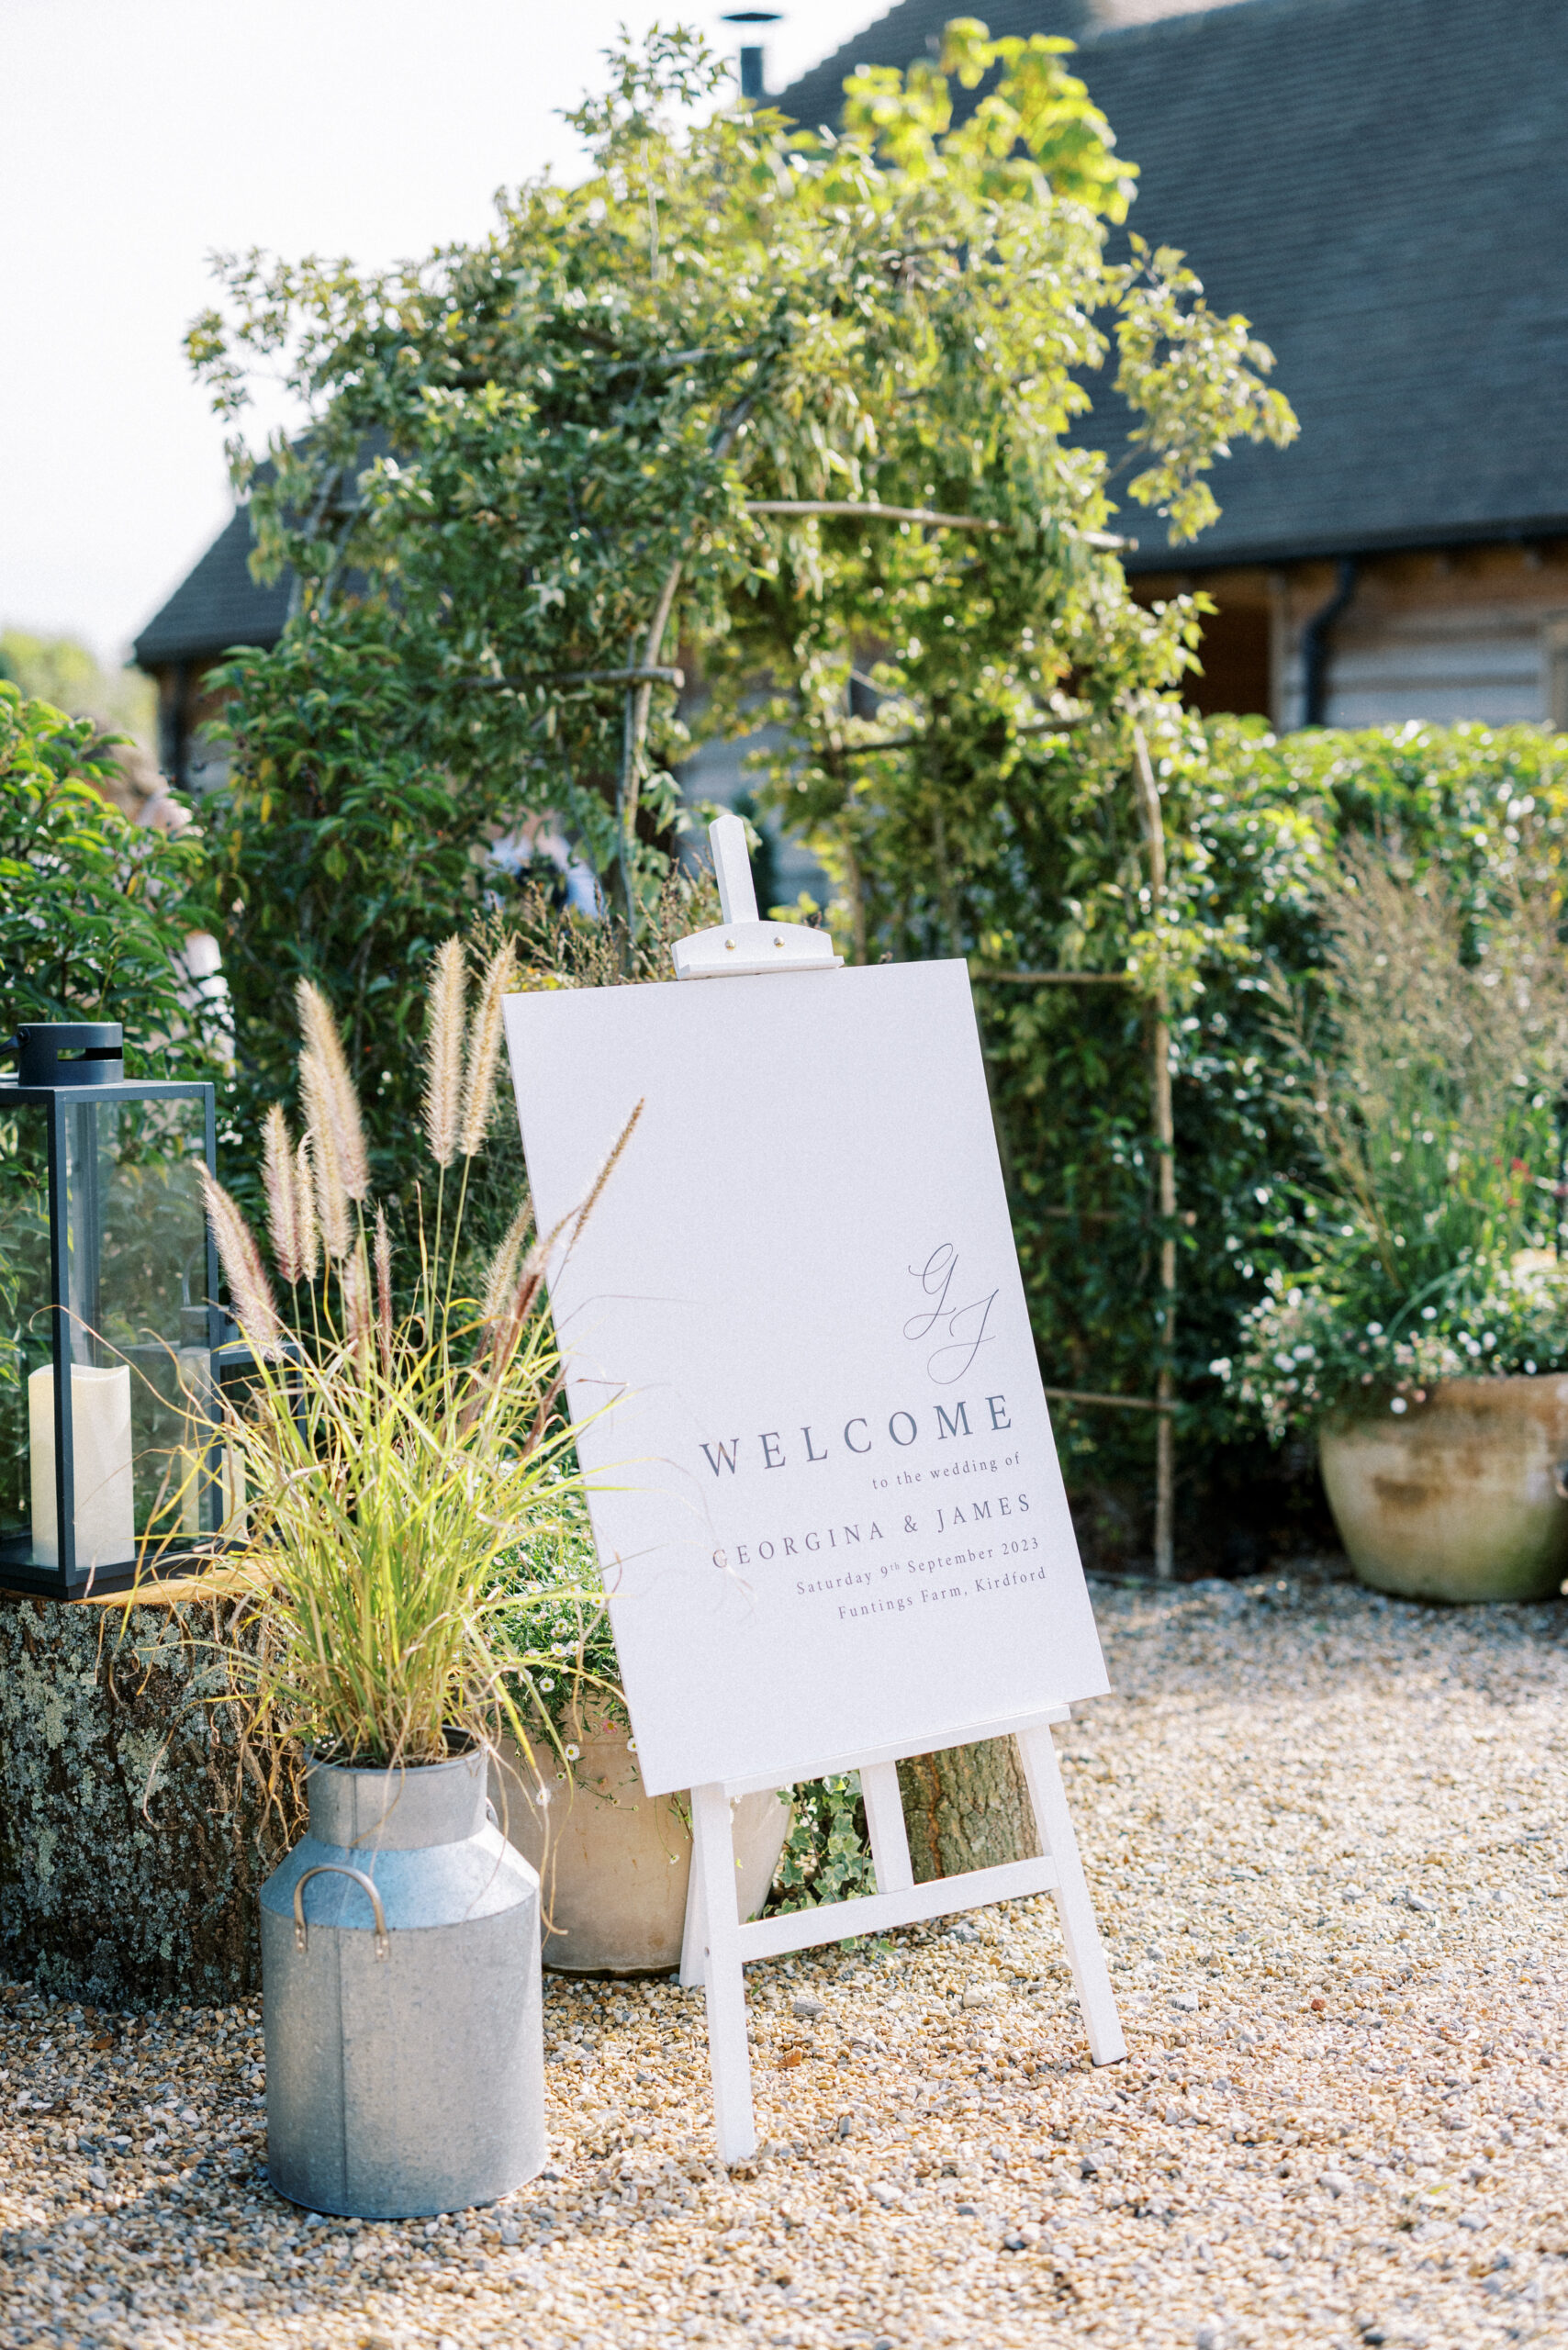 Timeless & Elegant English Country Garden Wedding Photography in West Sussex